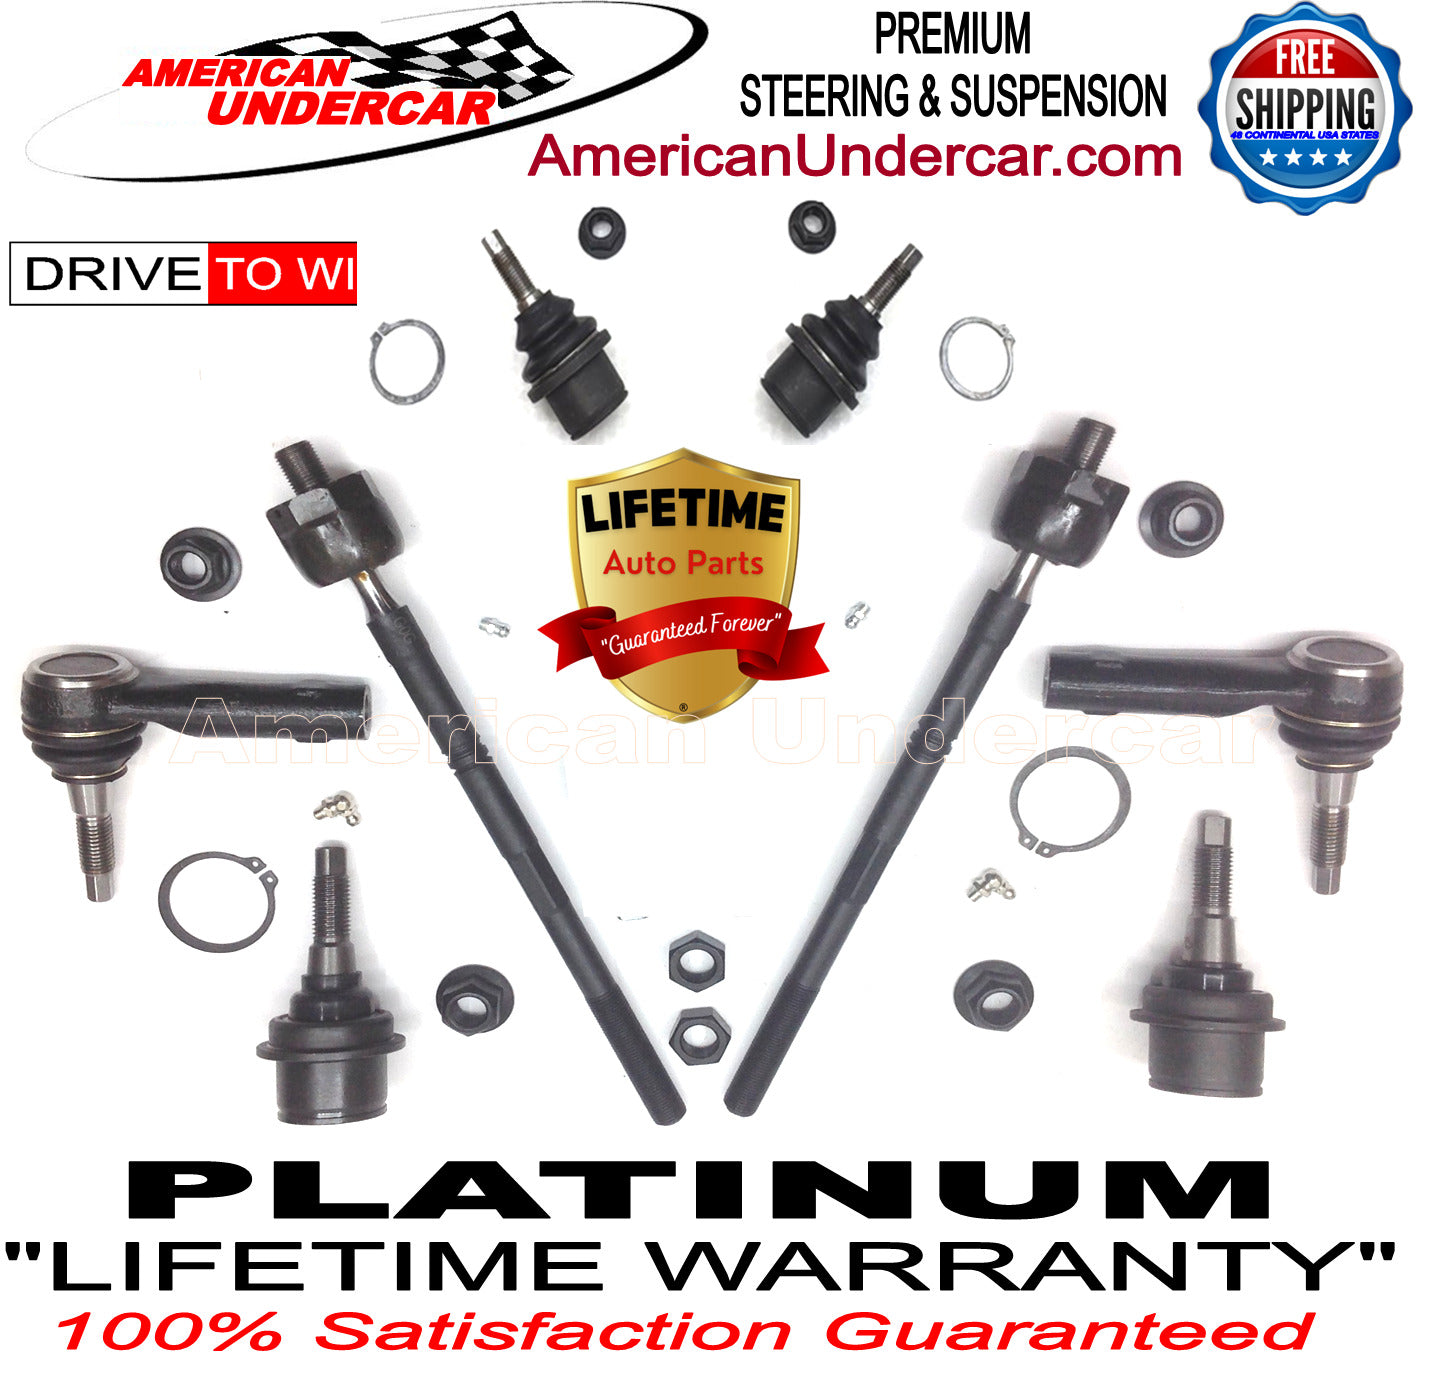 Lifetime Ball Joints Tie Rod Steering Suspension Kit for 2018-2021 Ford Expedition 4x4